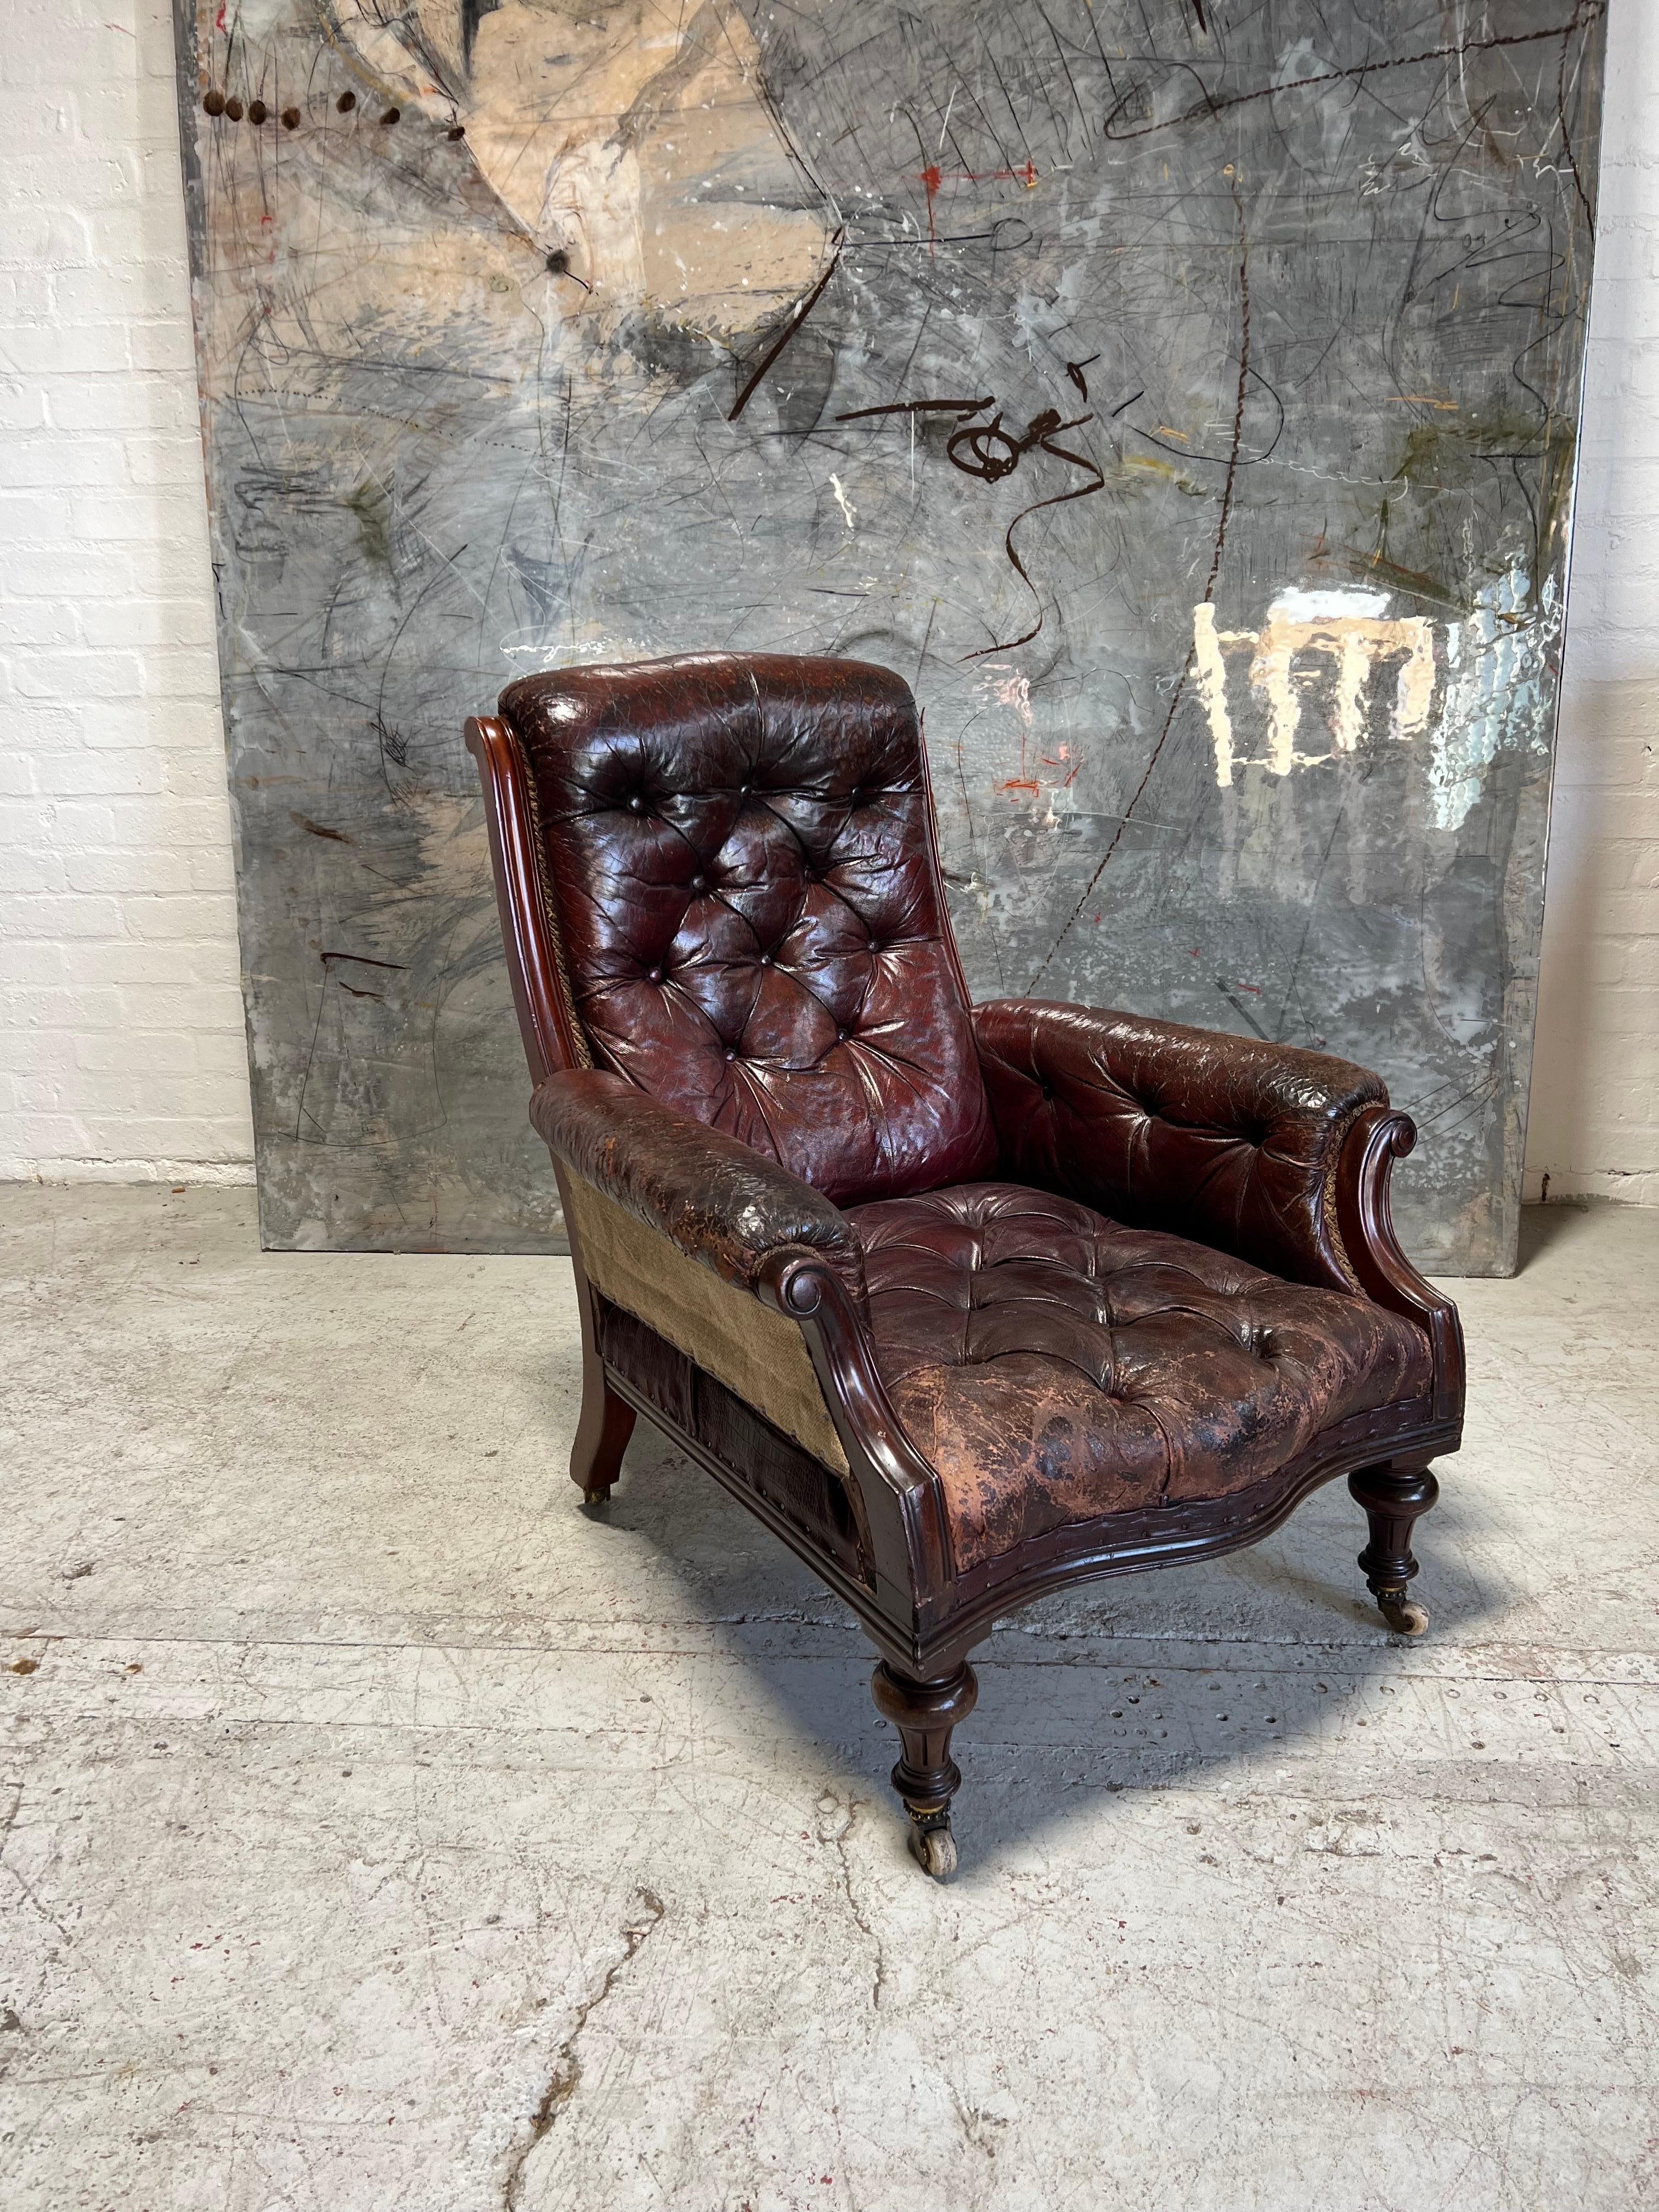 As a LAPADA dealer I always have a large stock of Chesterfield sofas and chairs ranging from early 19thC through to present day. We also craft our own Signature Collection in-house.

This particular piece dates circa 1835 and is an early piece by